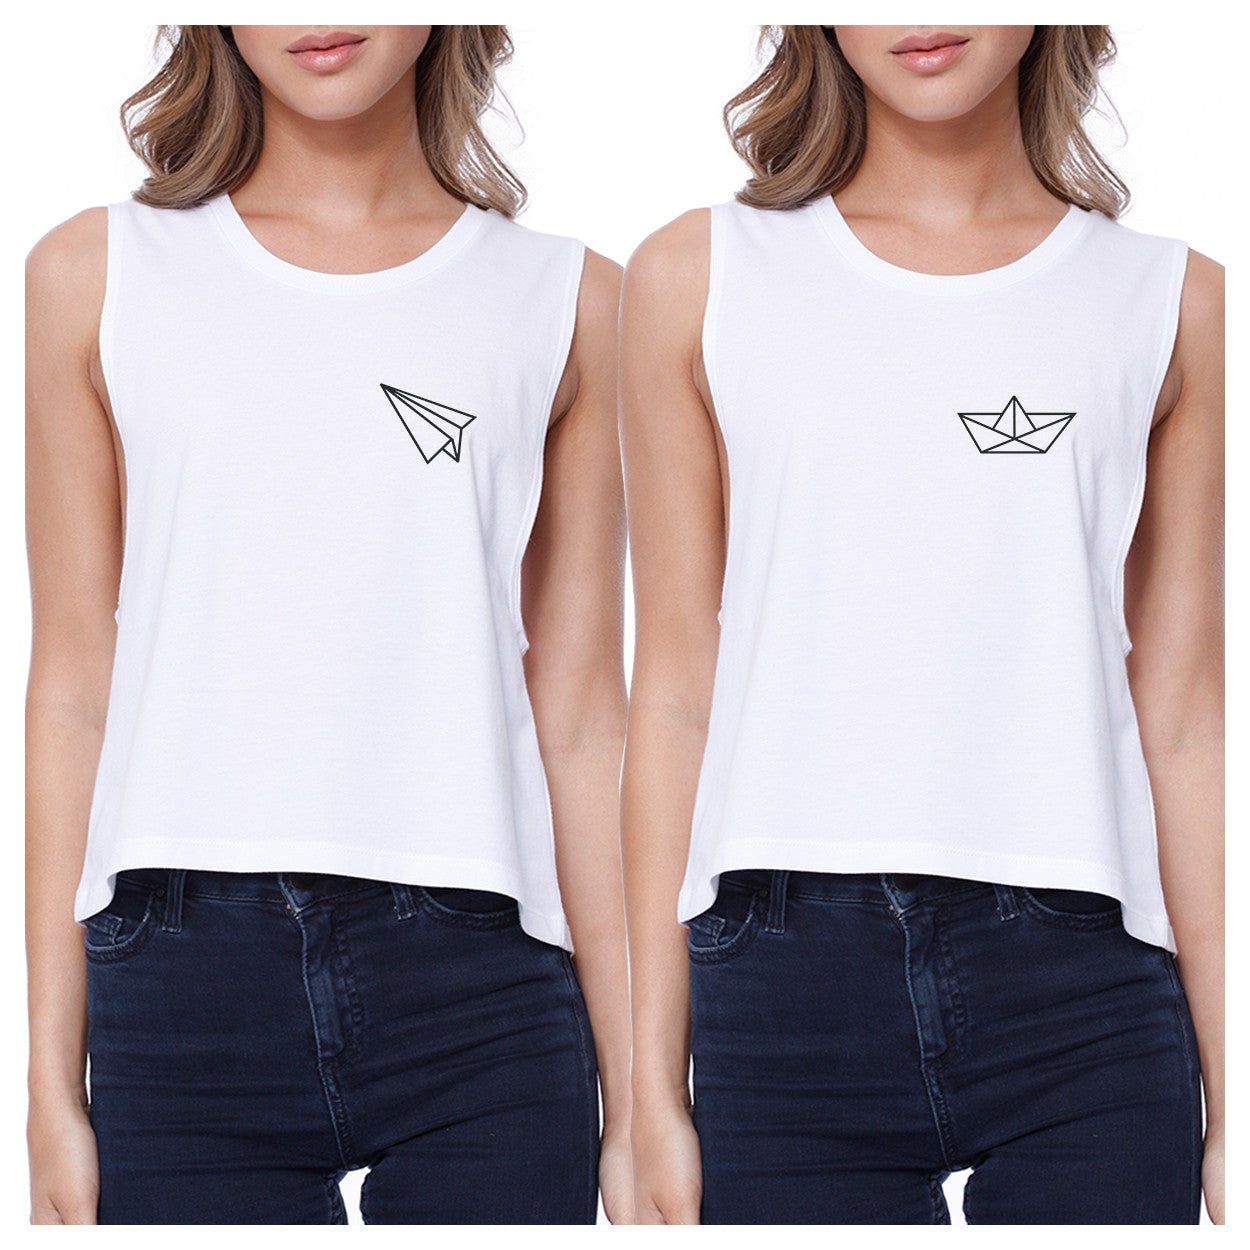 Origami Plane And Boat BFF Matching White Crop Tops